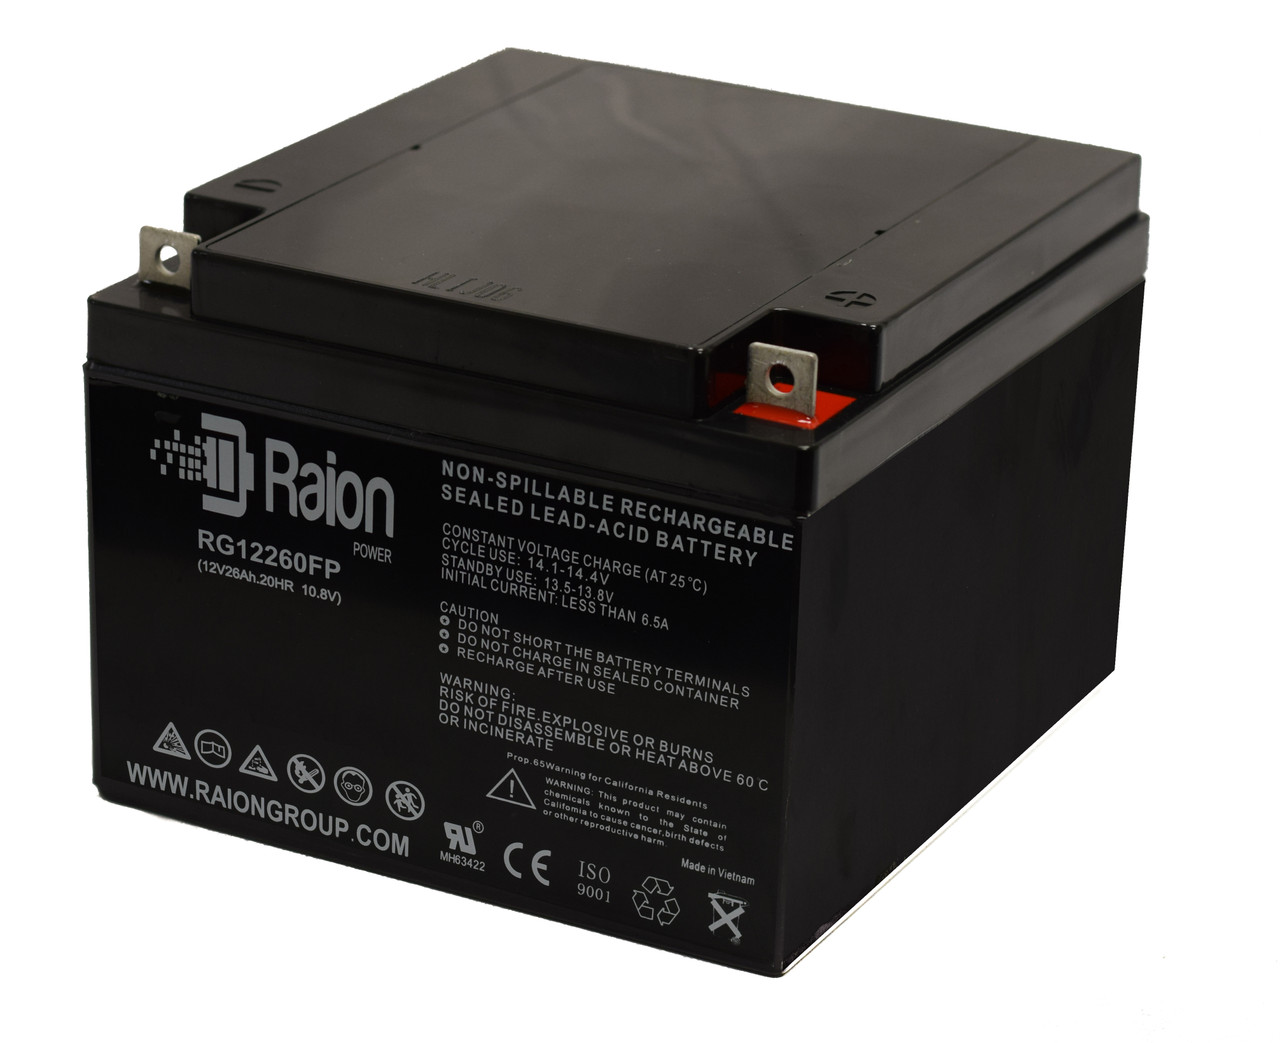 Raion Power Replacement 12V 26Ah Battery for SigmasTek SP12-28 - 1 Pack